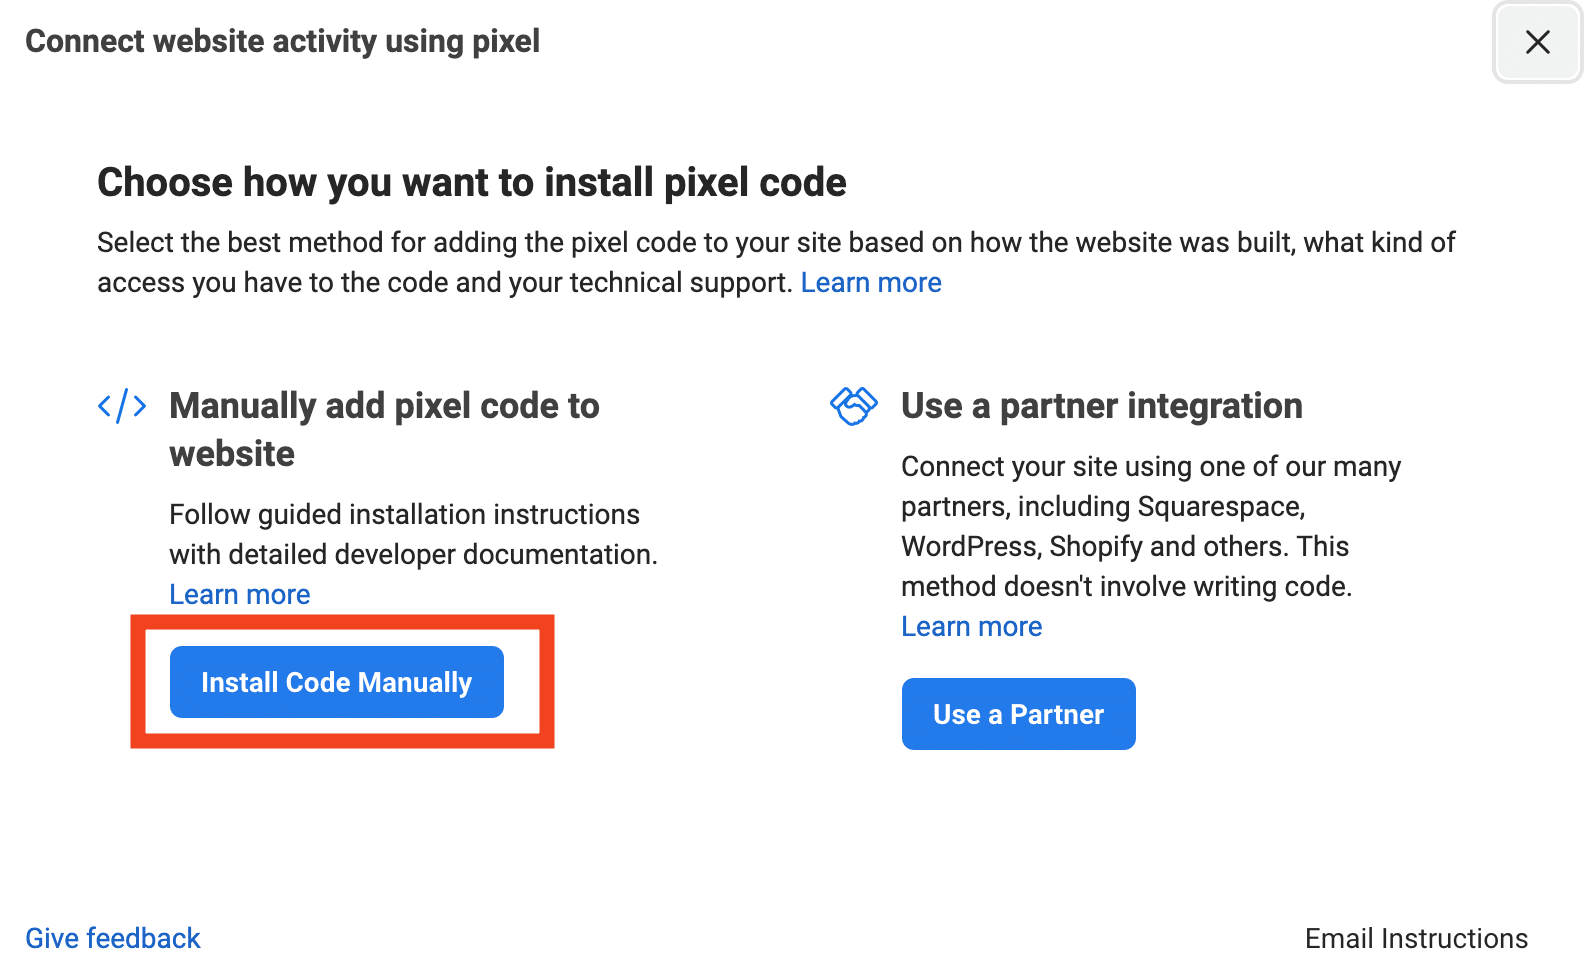 Install Code Manually for the Facebook pixel.